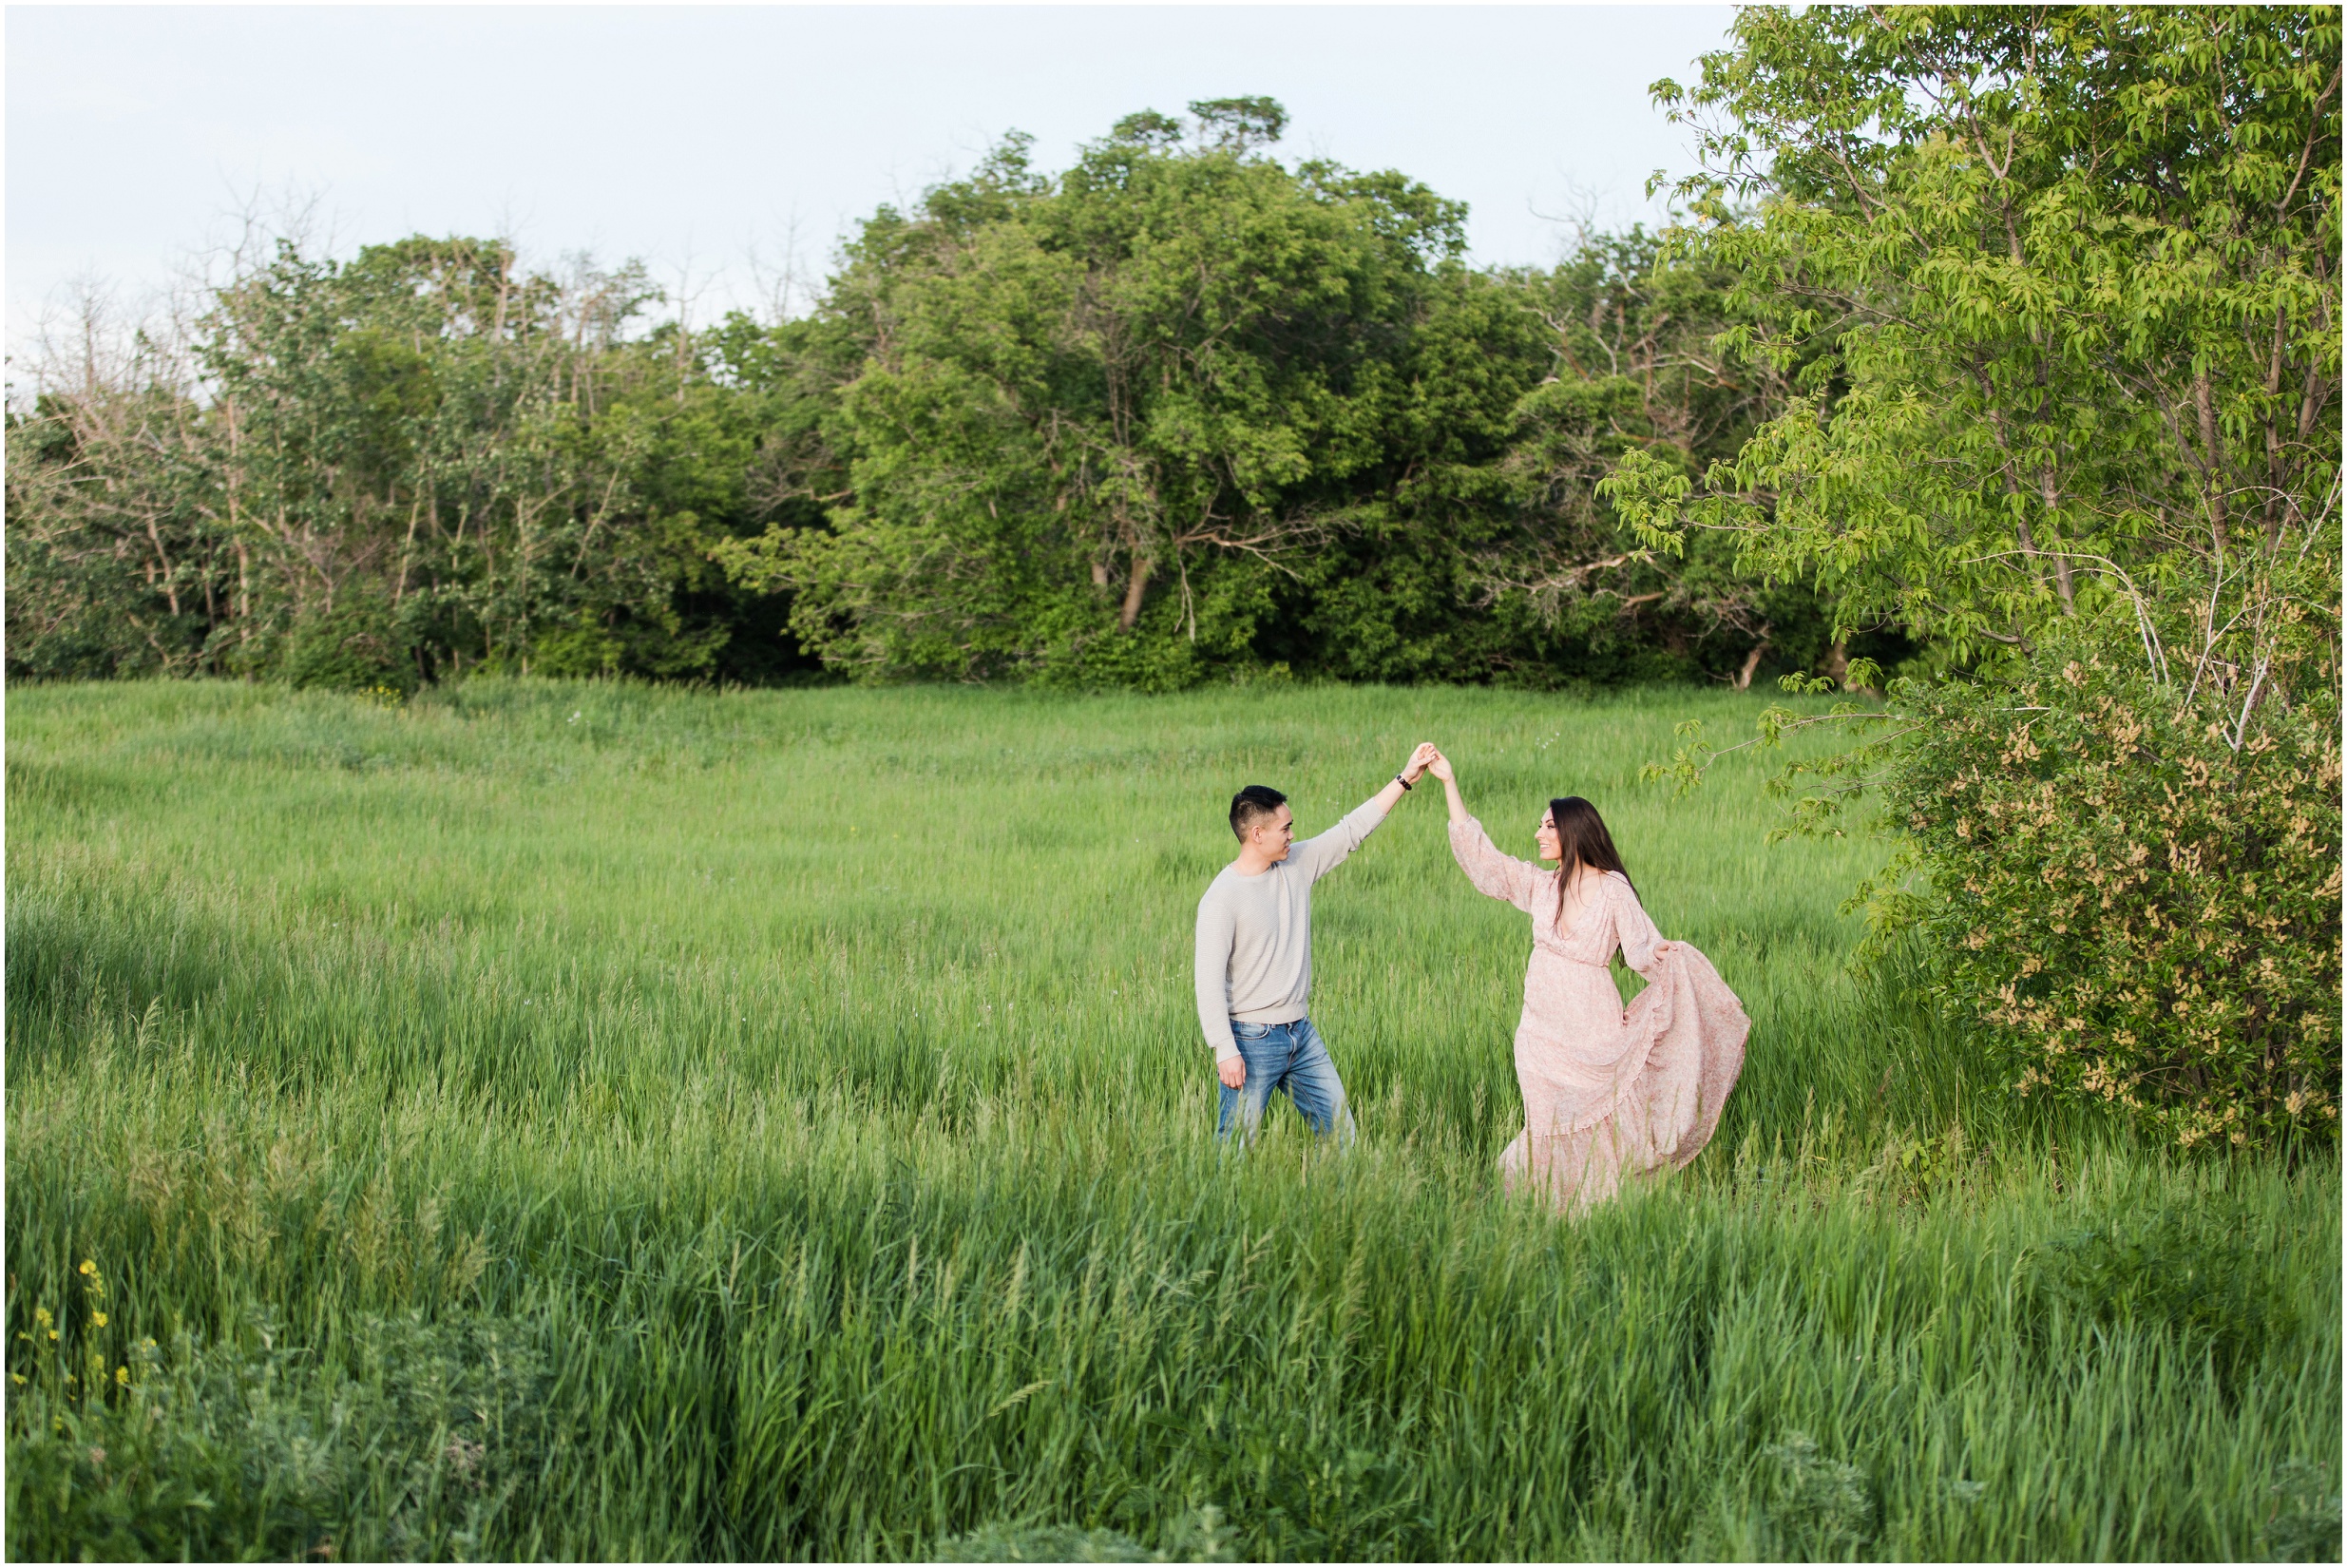 engagment photos, edmonton engagement photographer, nc photography, edmonton wedding photographer, outdoor engagement photos, field engagement photos, what to wear for engagement photos